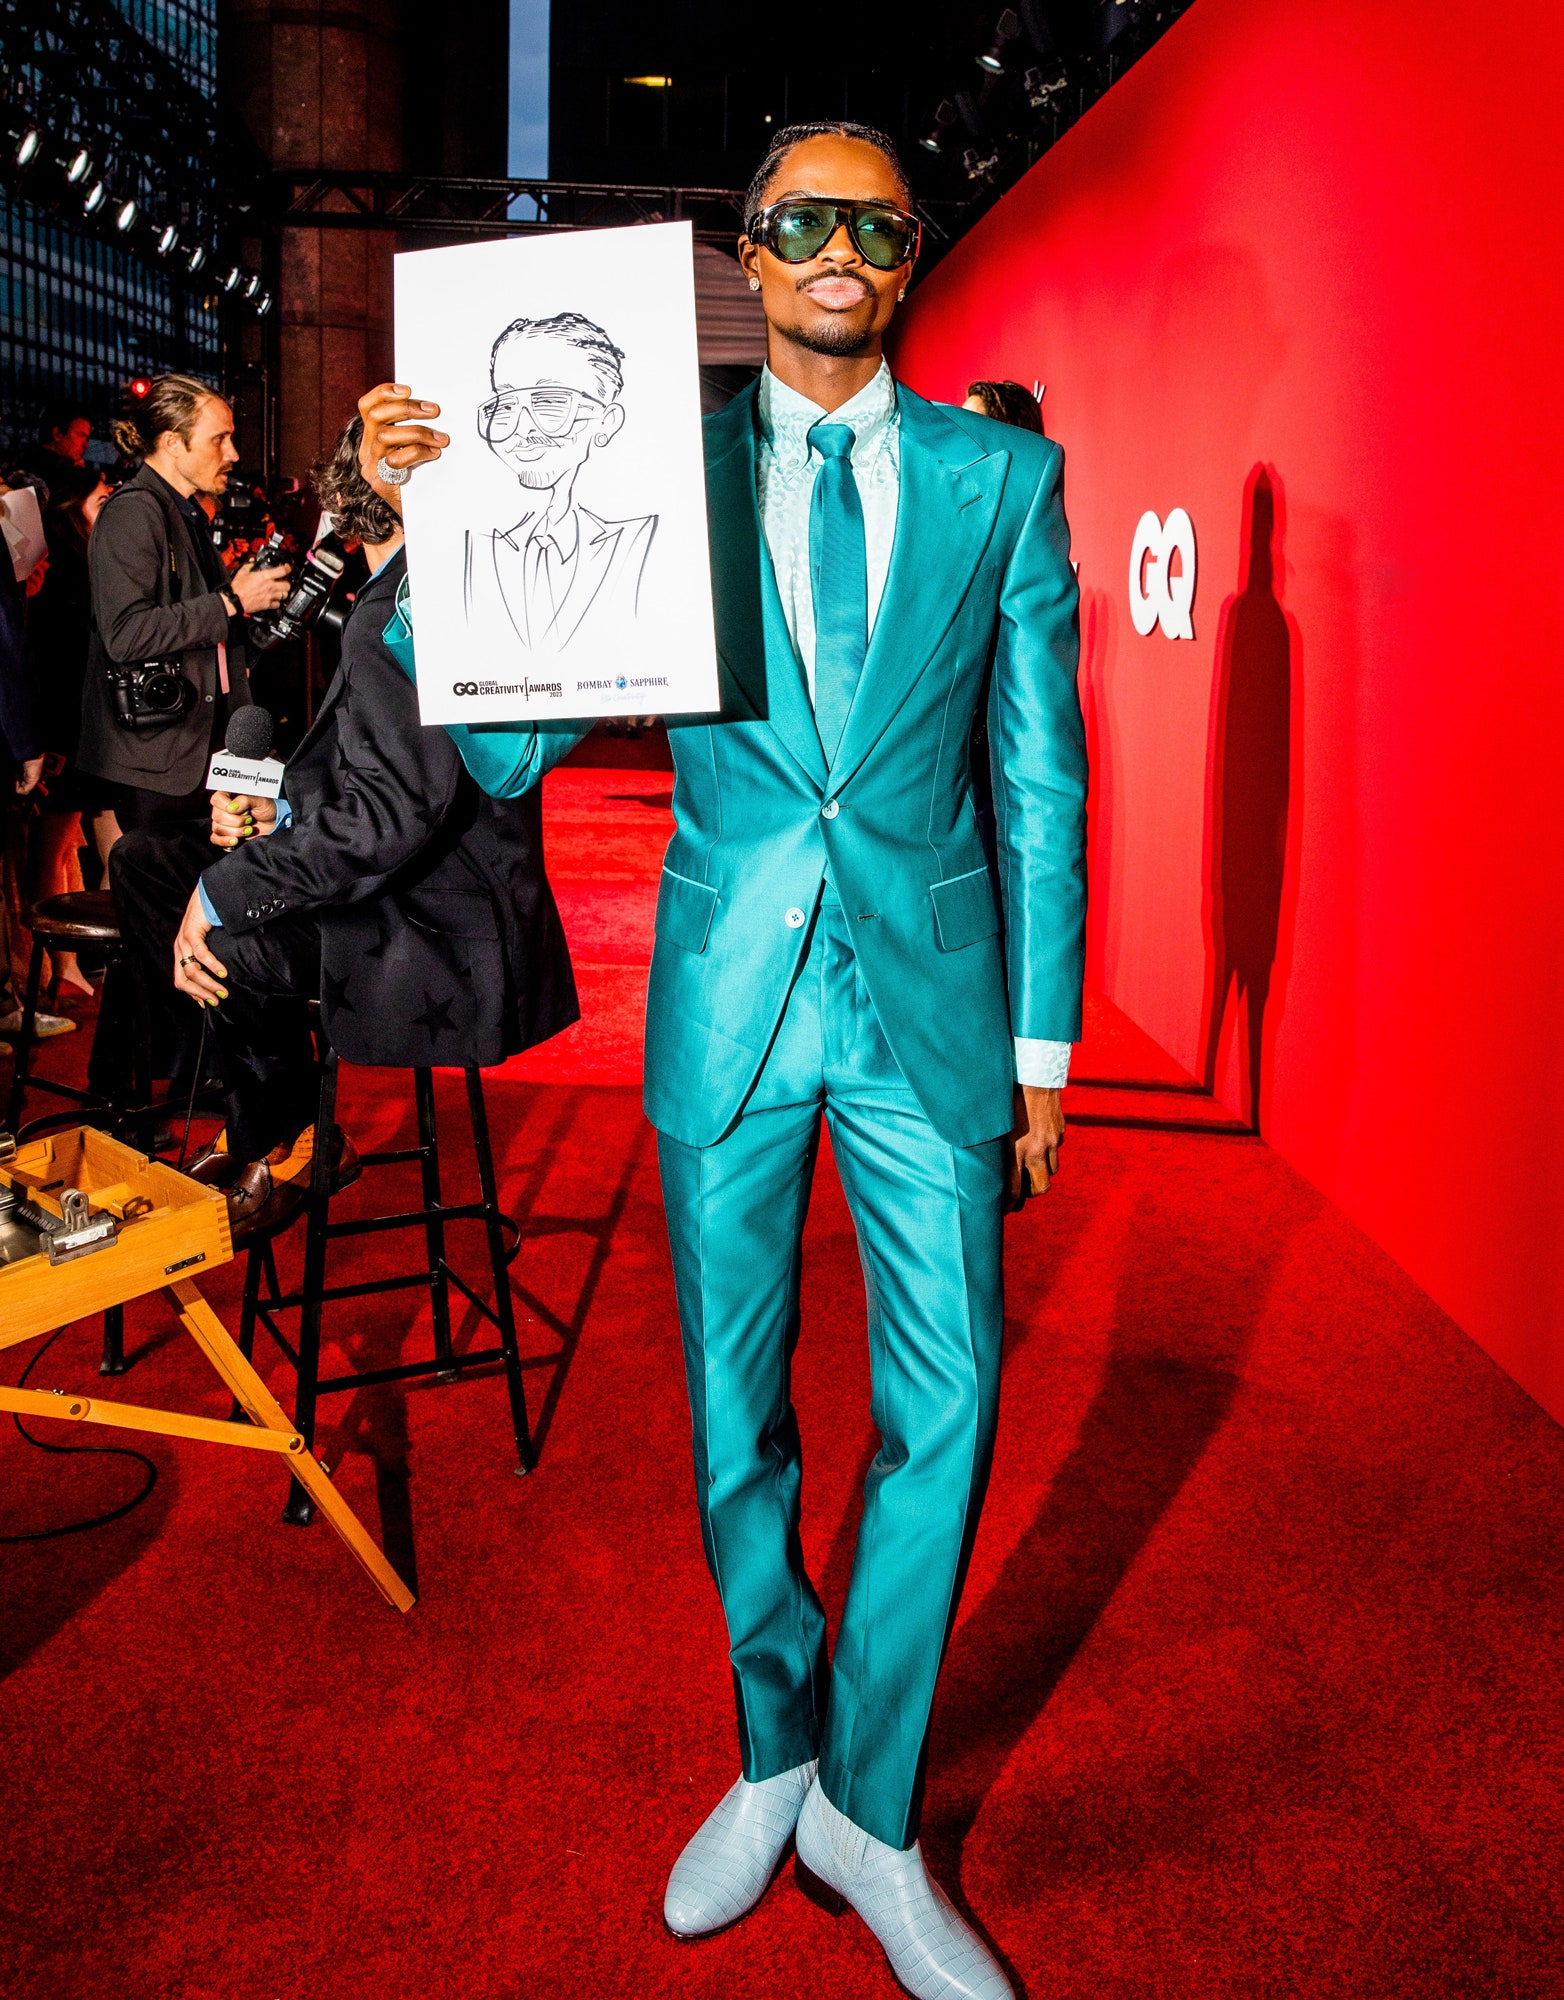 step-onto-the-red-carpet-at-gq’s-first-ever-global-creativity-awards-in-nyc